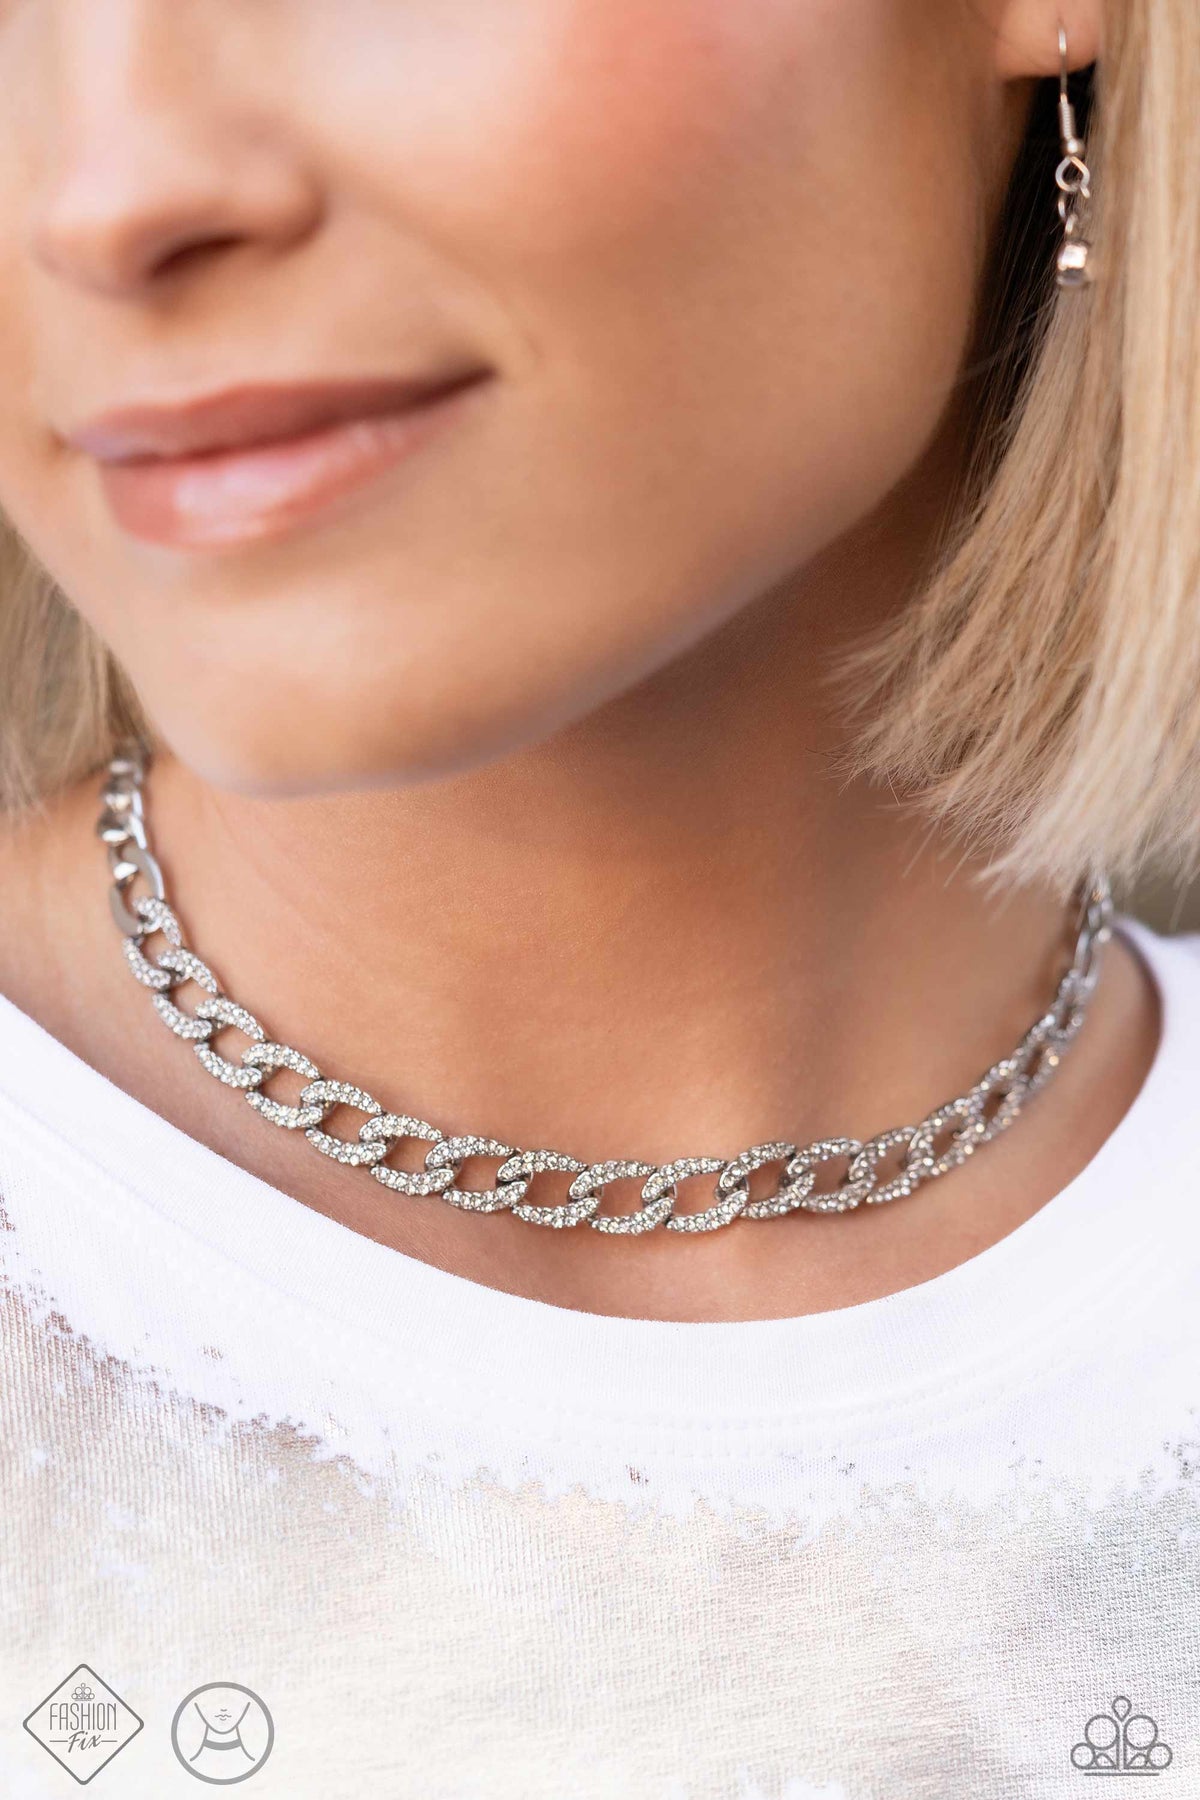 Fiercely Independent White Rhinestone Choker Necklace - Paparazzi Accessories-on model - CarasShop.com - $5 Jewelry by Cara Jewels